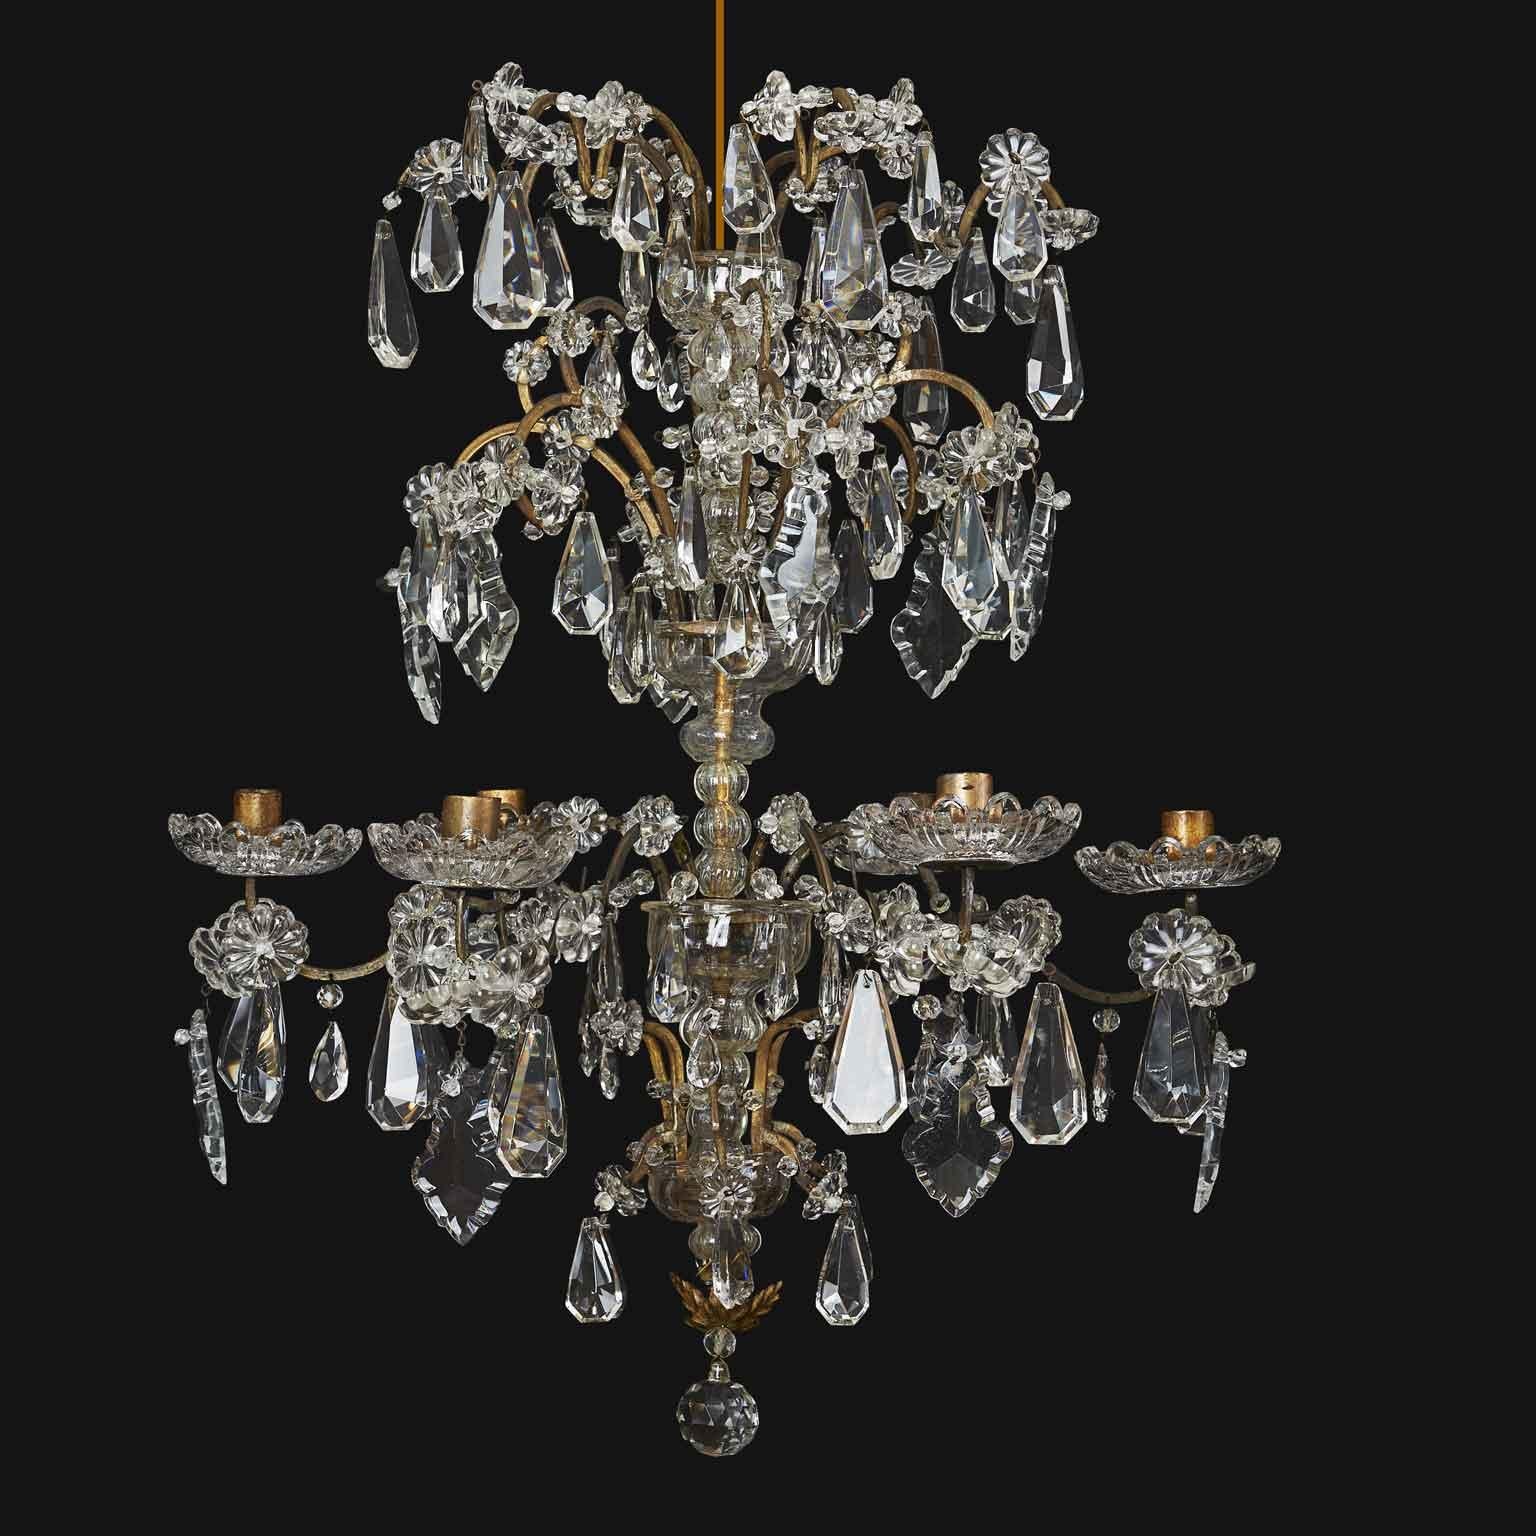 Delightful mid-1800s Italian gold-plated brass and crystal six-light chandelier made entirely by hand and  born for candle lighting; the structure has a central stem lined with crystal vases, from the lower part of which depart six curved arms